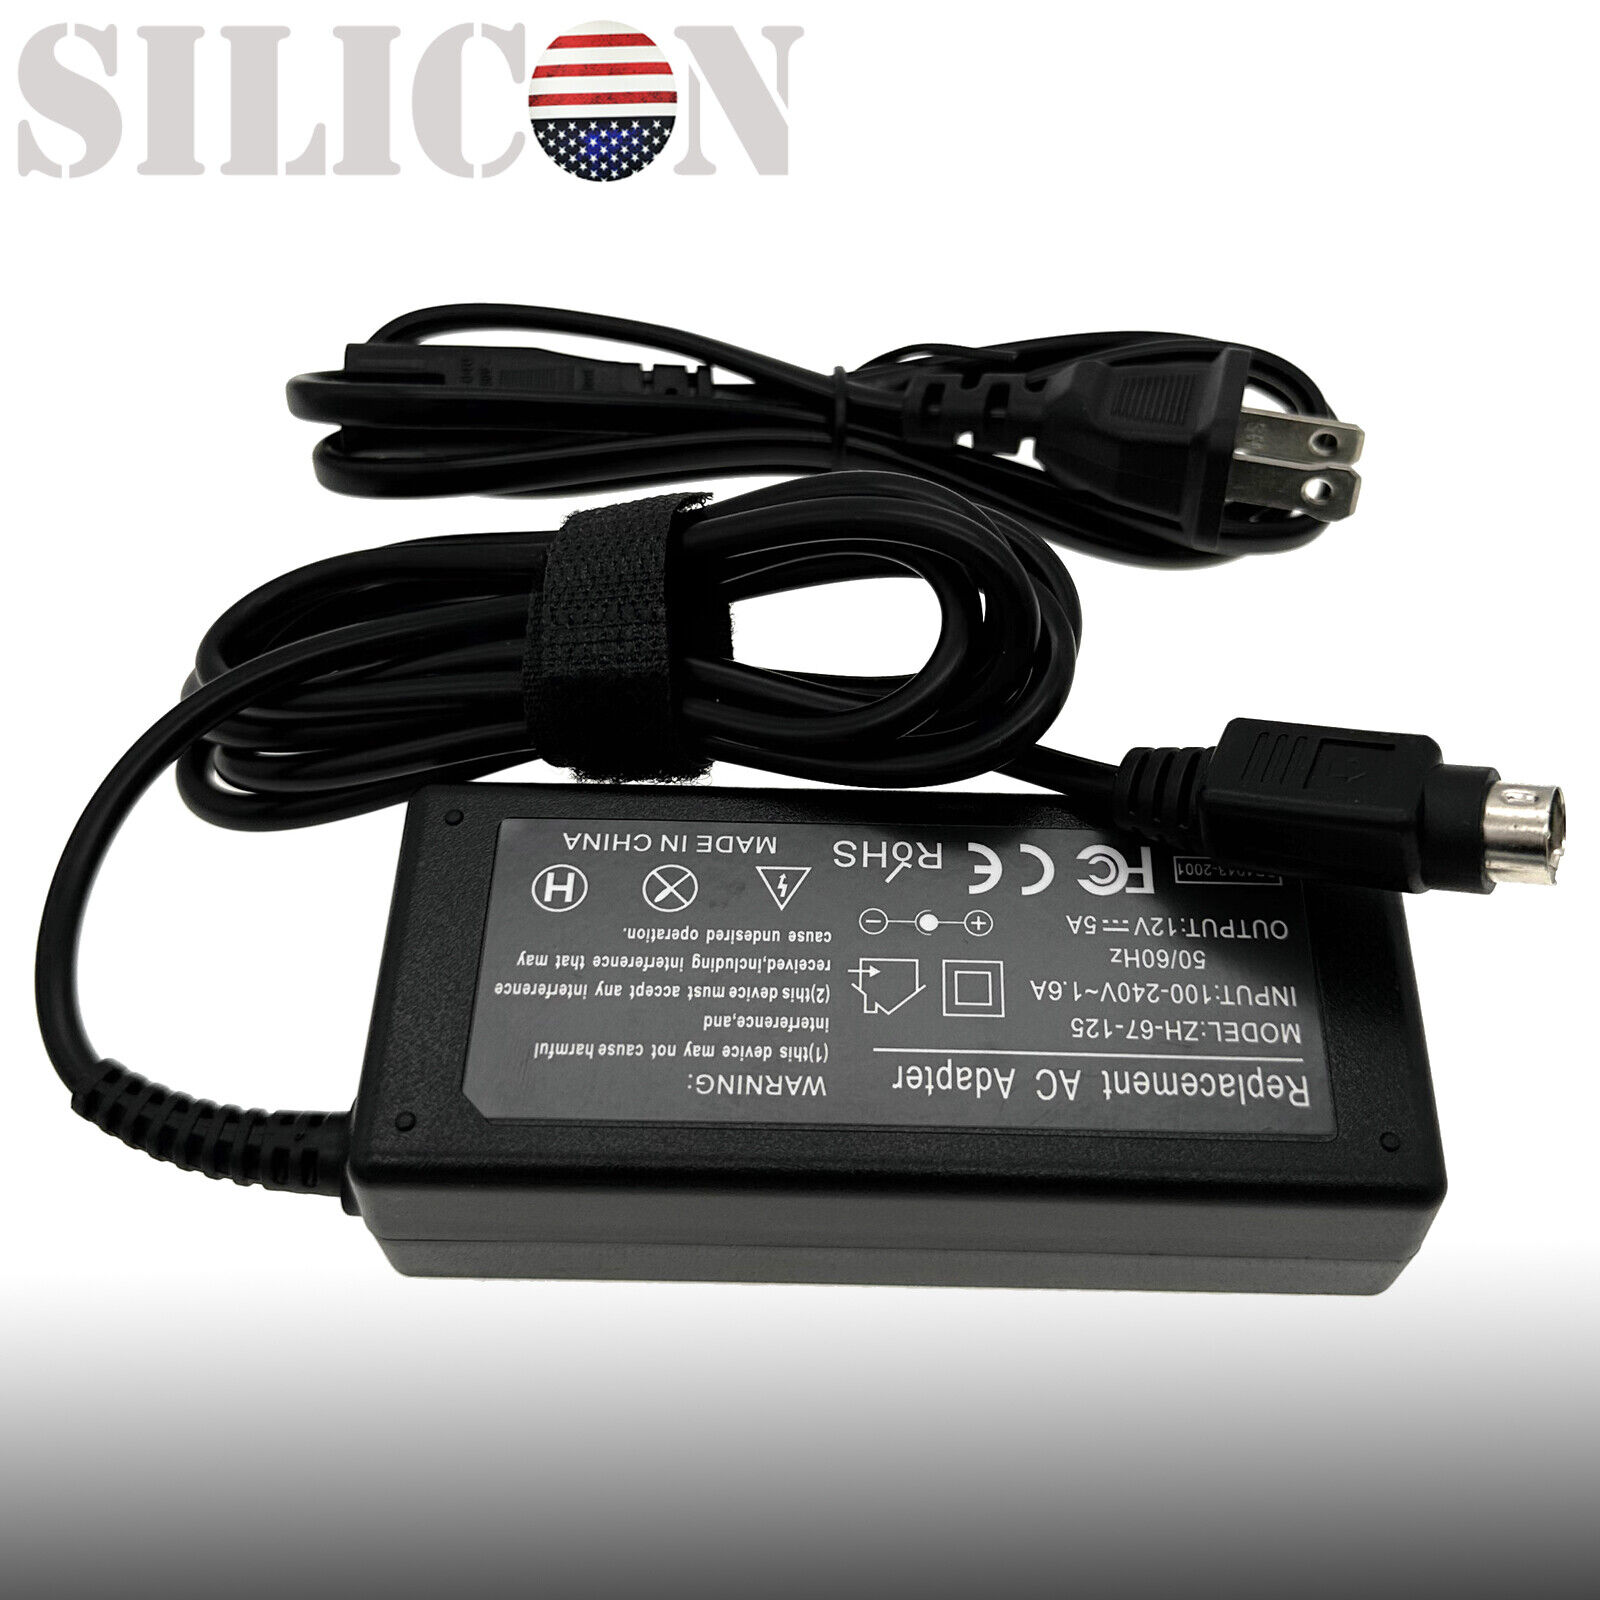 12V 4-Pin DIN AC Power Adapter Charger for Sanyo CLT1554 CLT2054 LCD TV Monitor